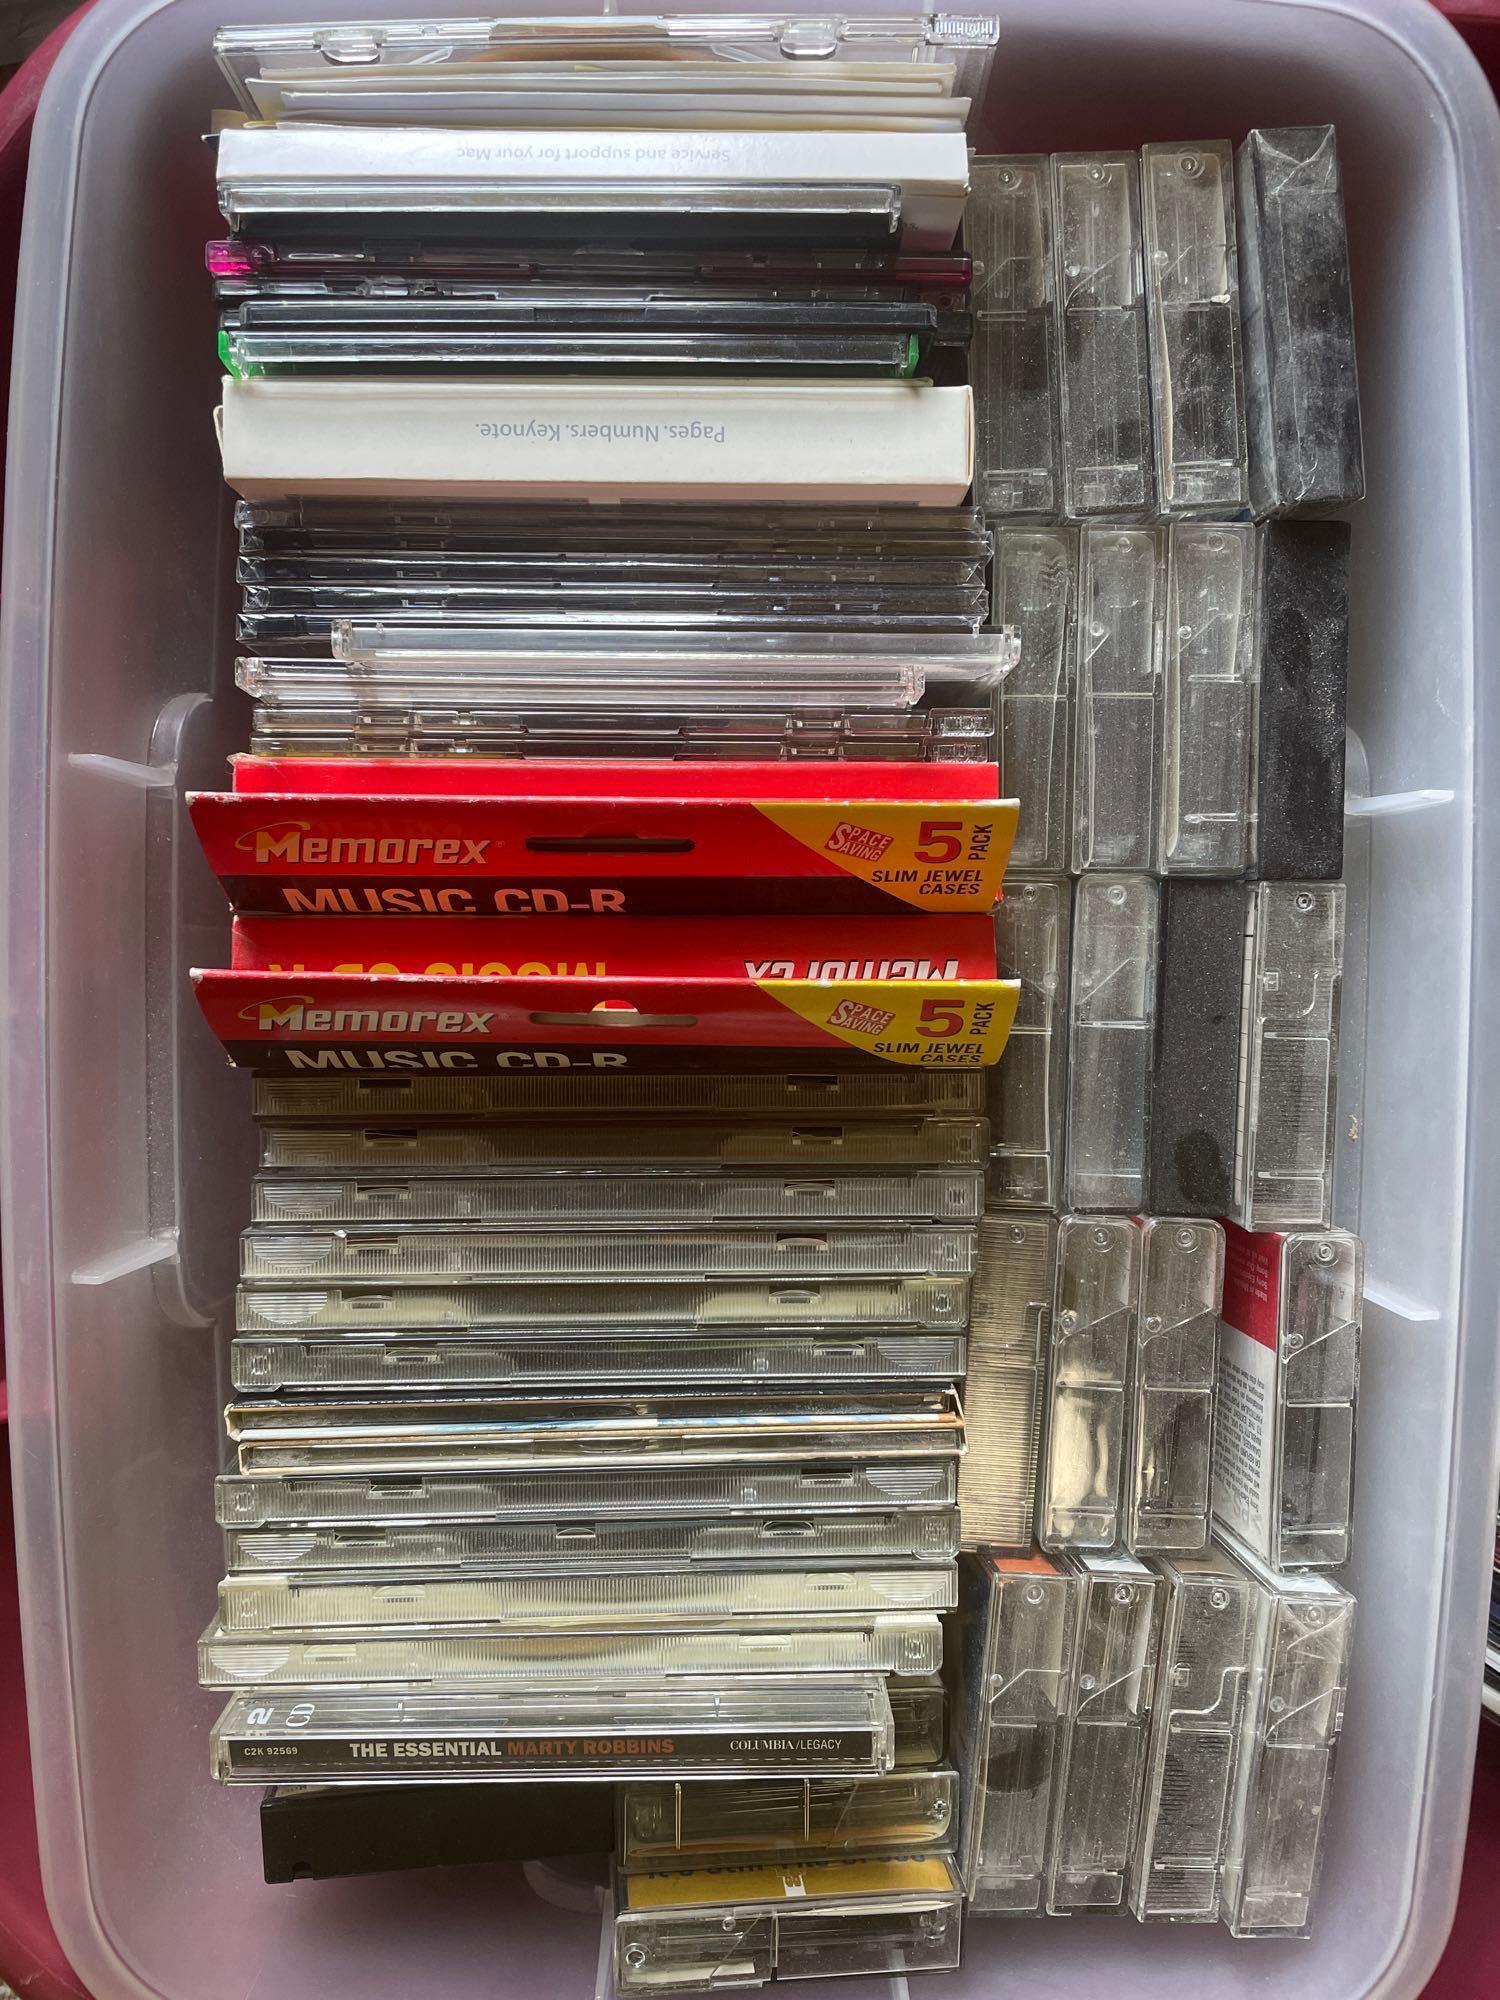 cassette tapes; VHS tapes; CDs